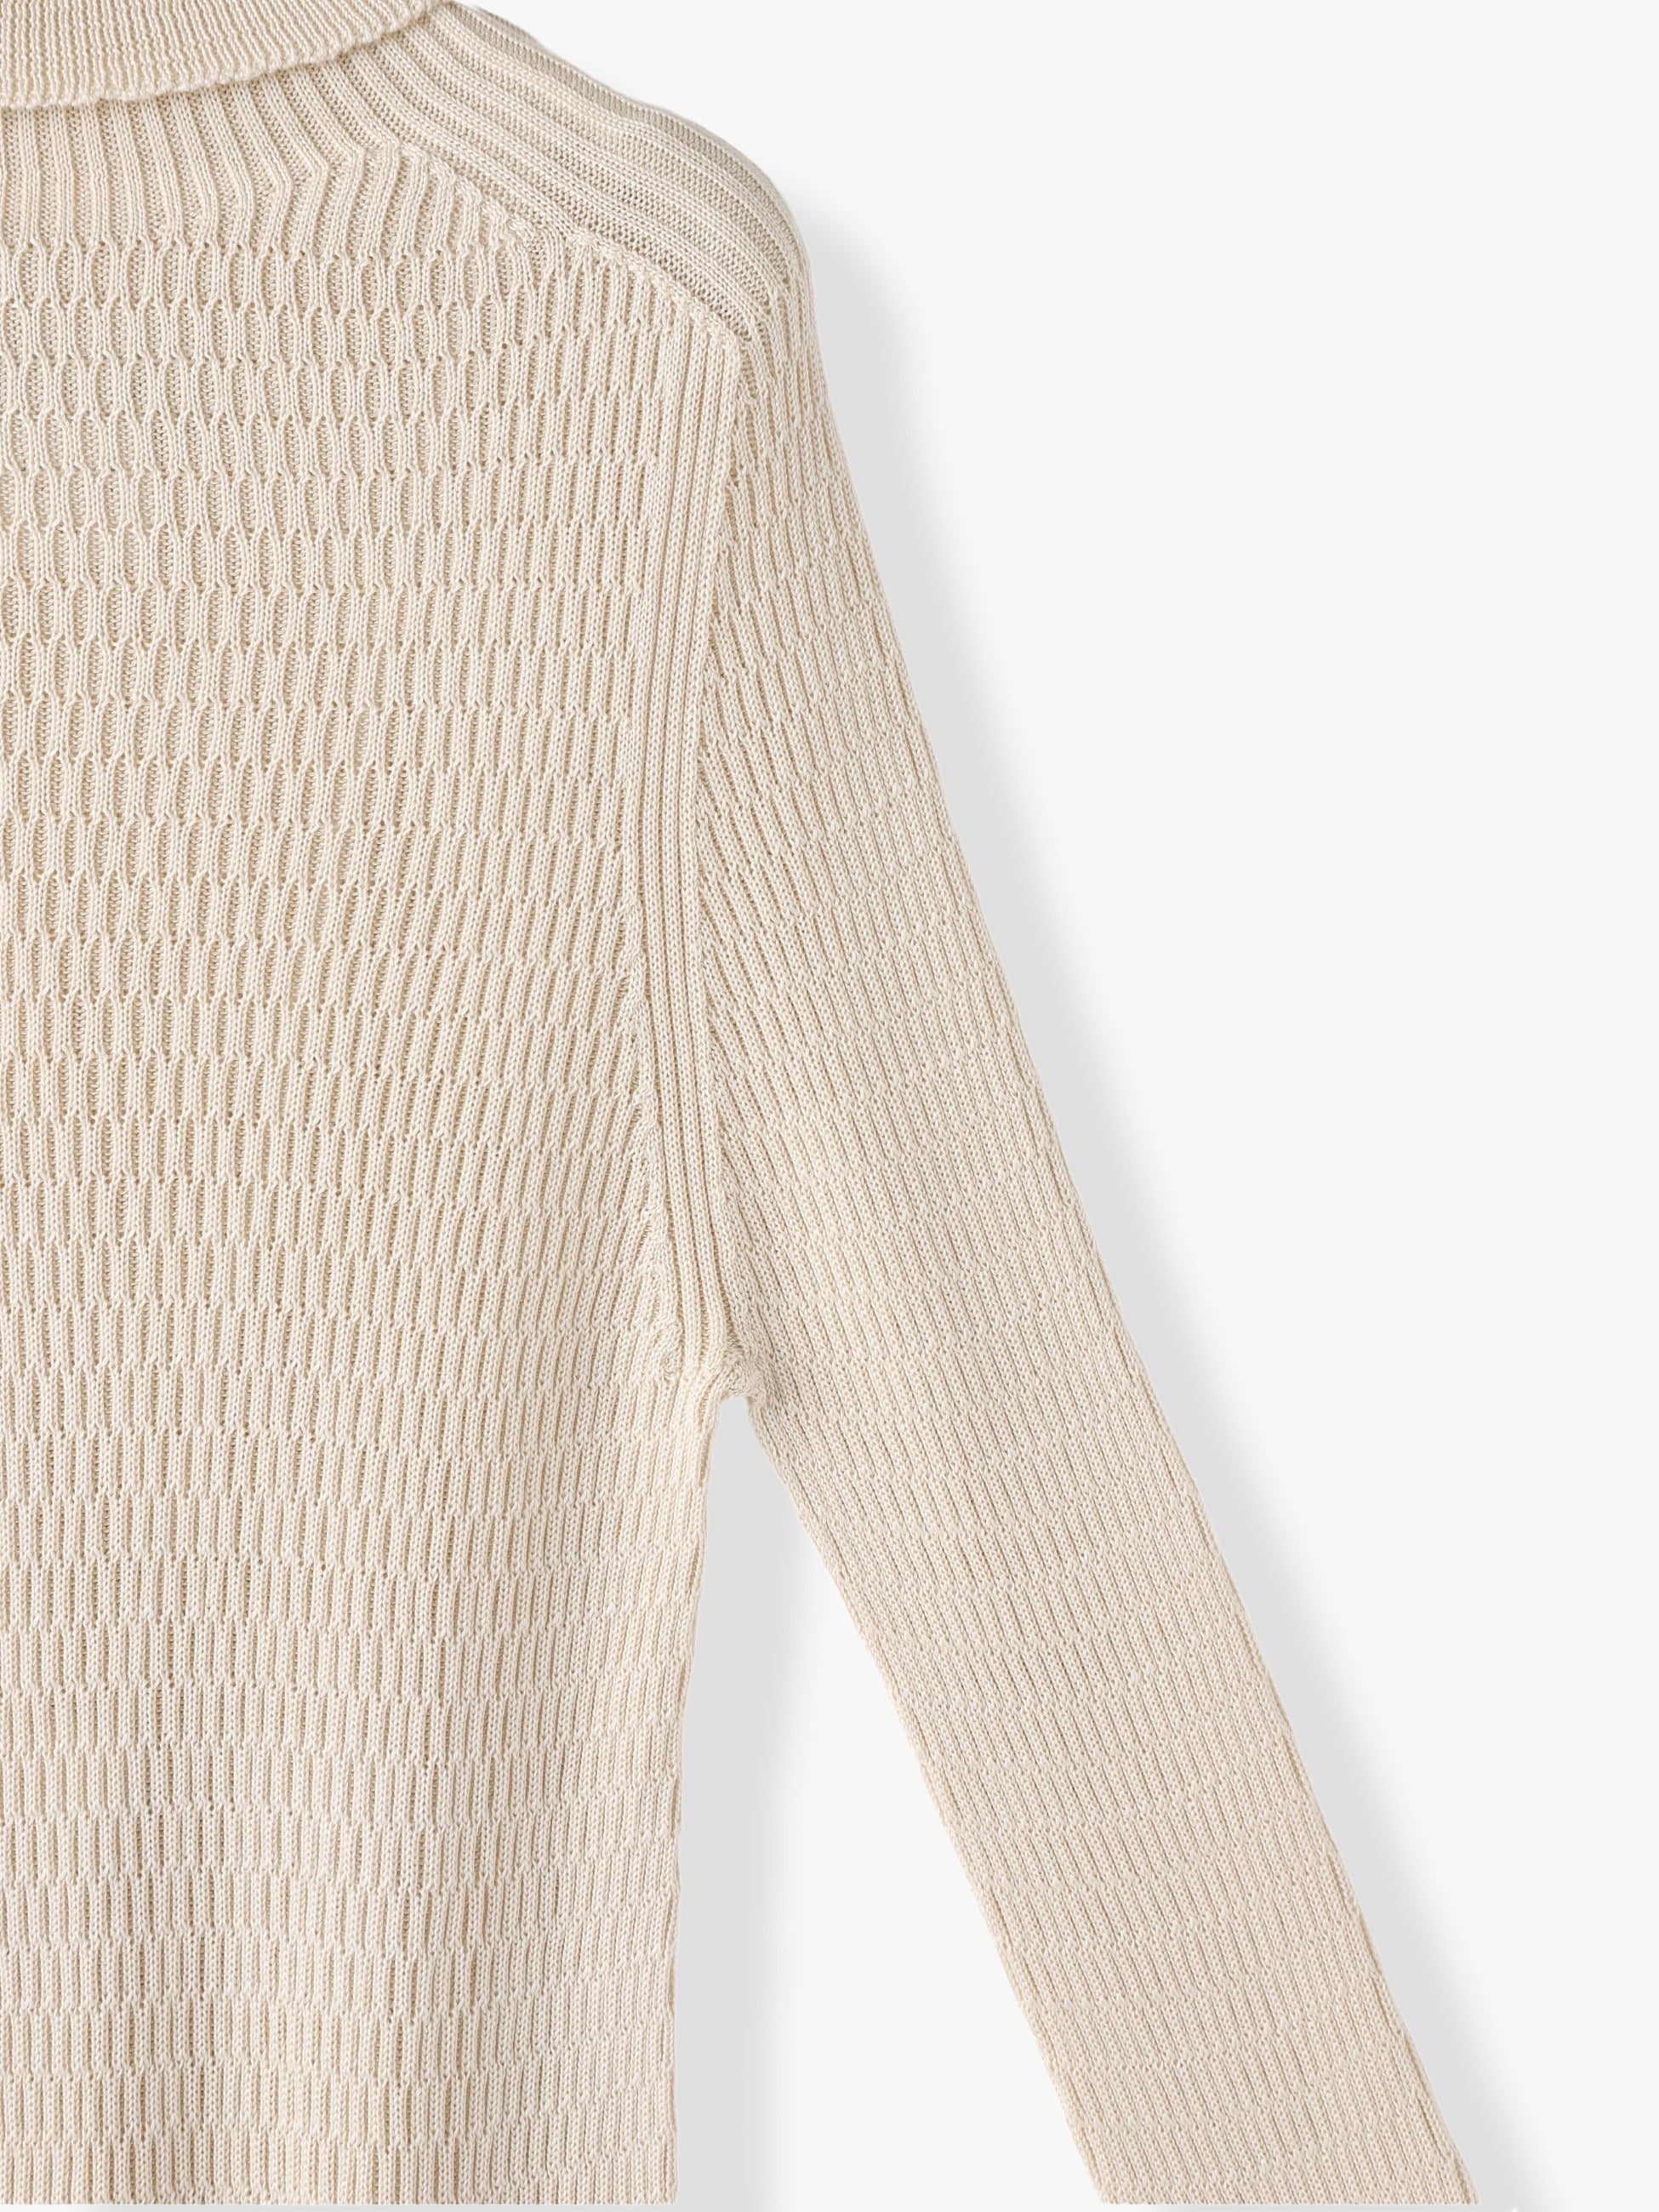 Honeycomb Knit Turtle Neck Pullover｜UNION LAUNCH(ユニオンランチ